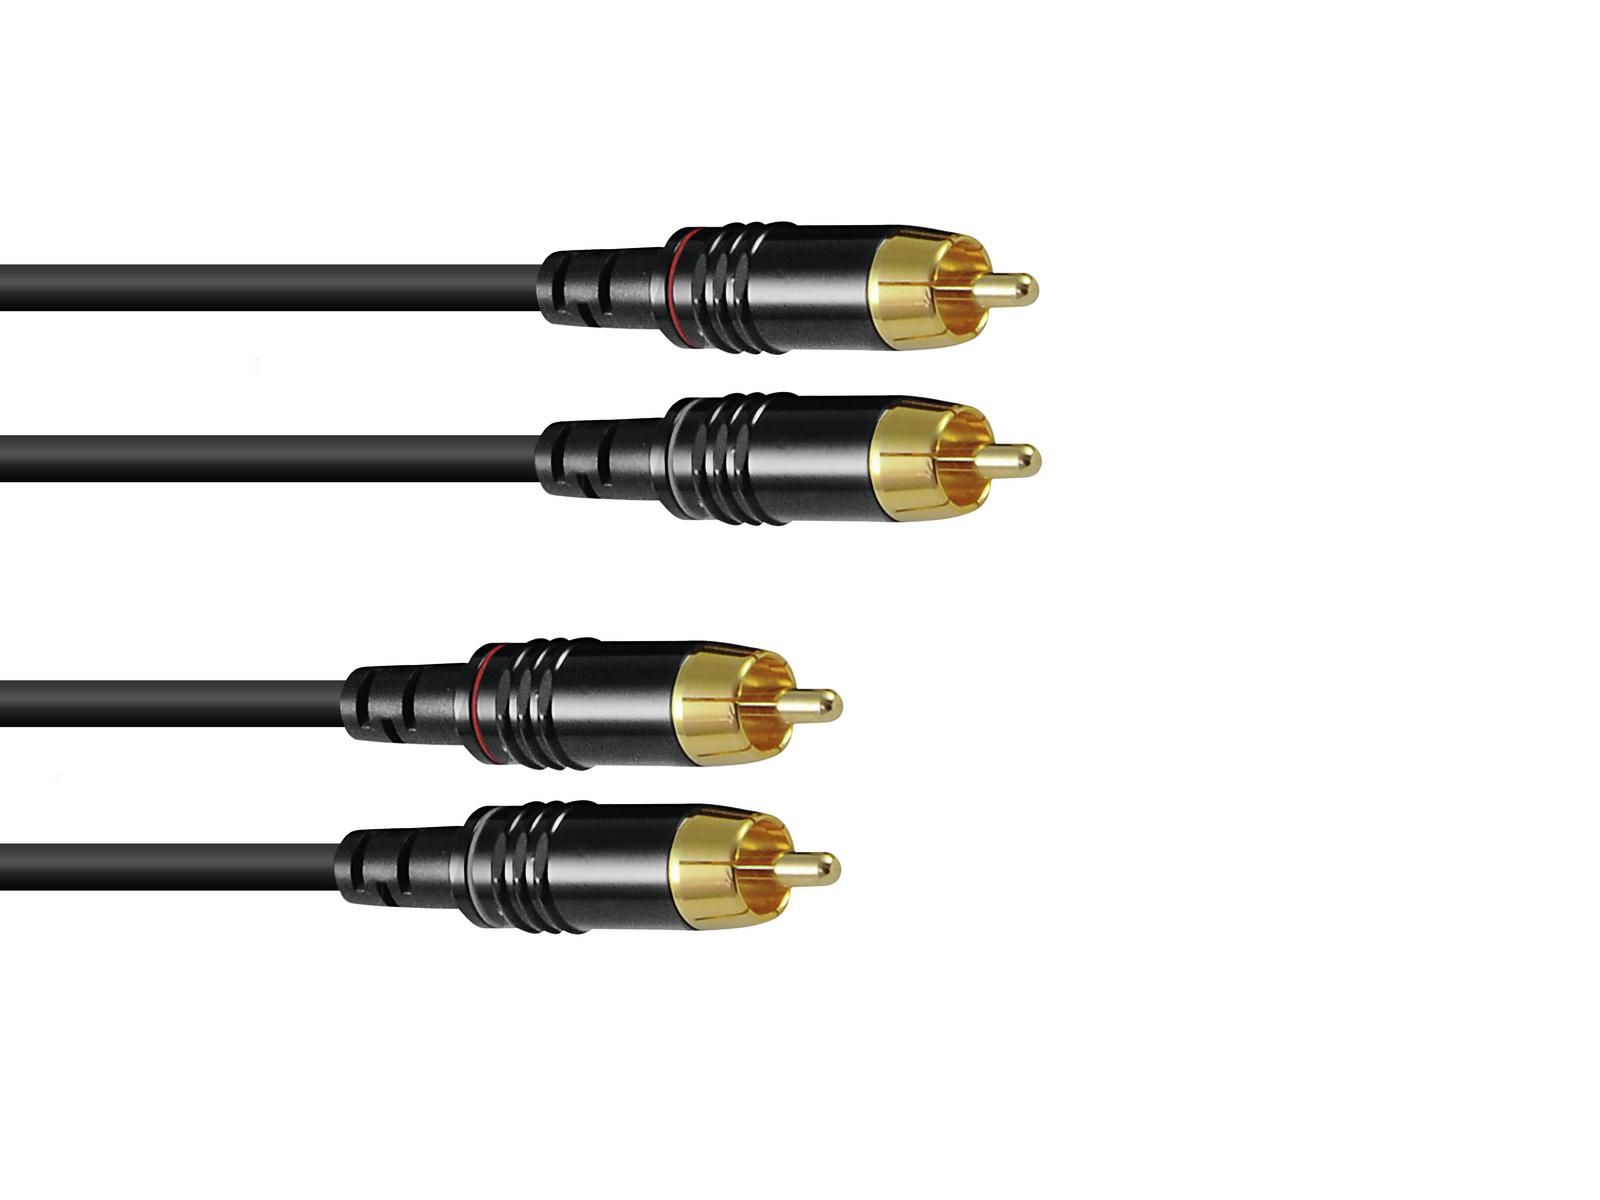 Sommer RCA cable 2x2 10m Black Hicon